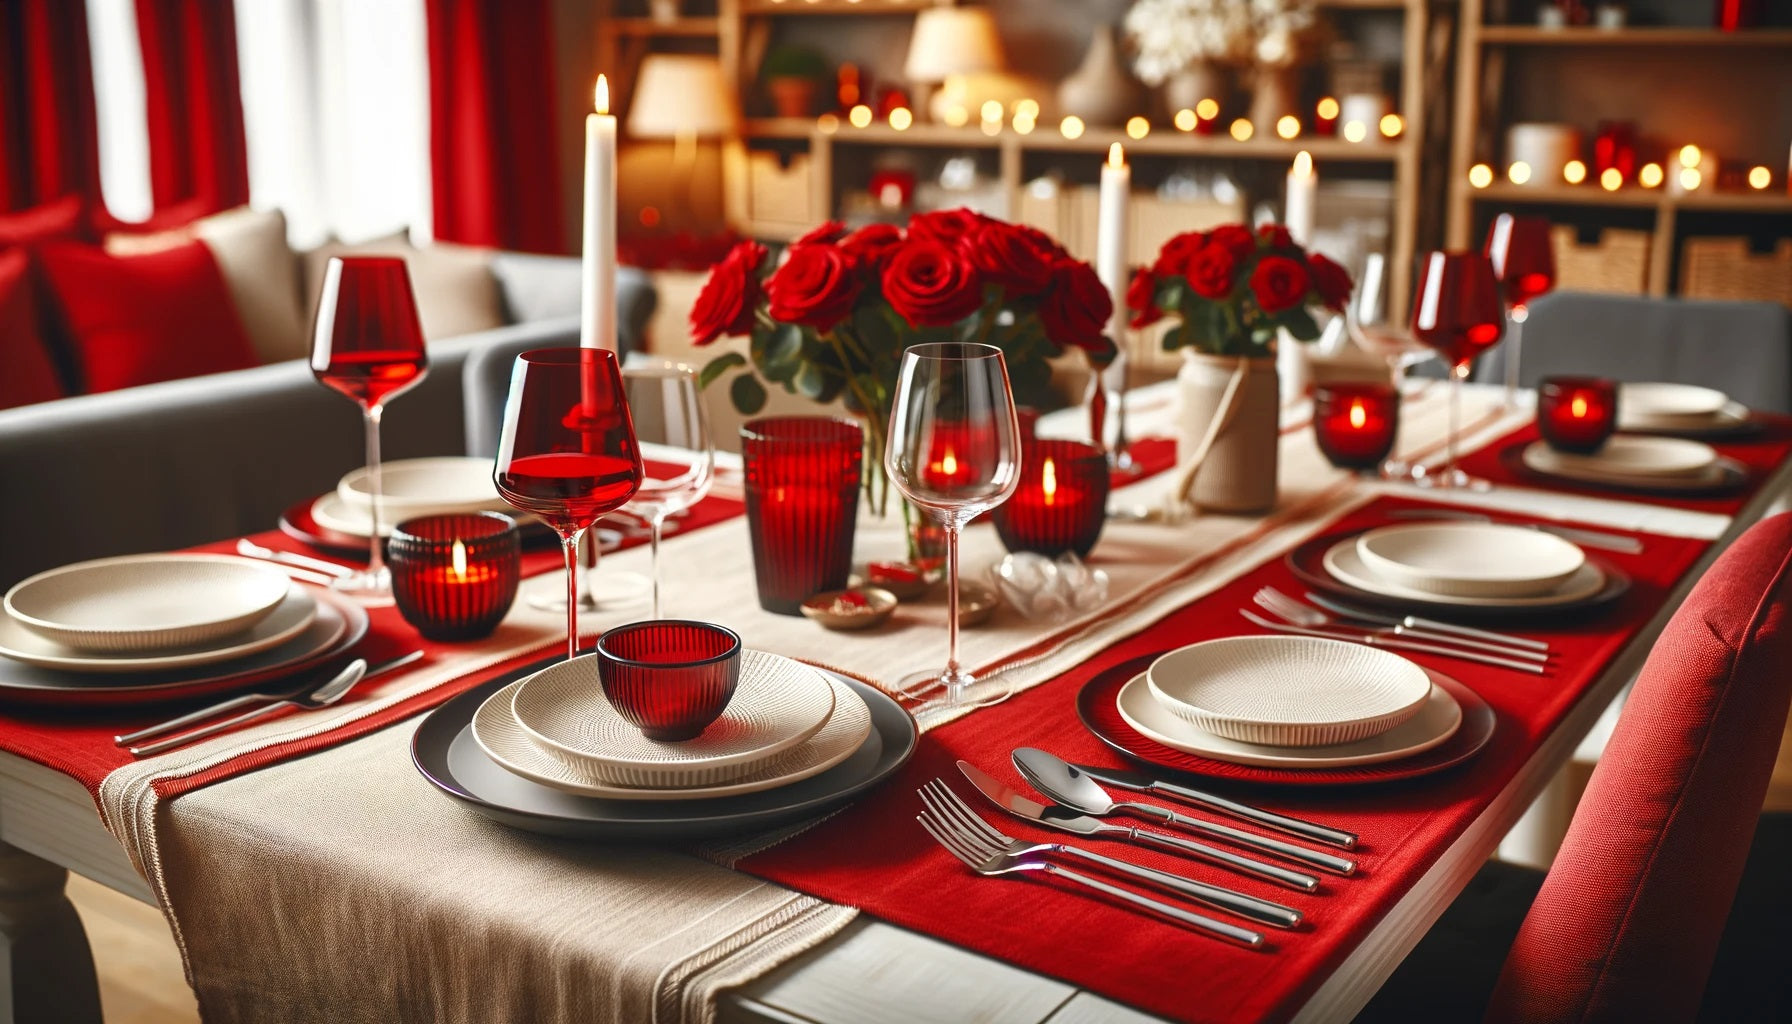 A stylish dining table set with red cotton placemats, white plates, silver cutlery, and red wine glasses. 